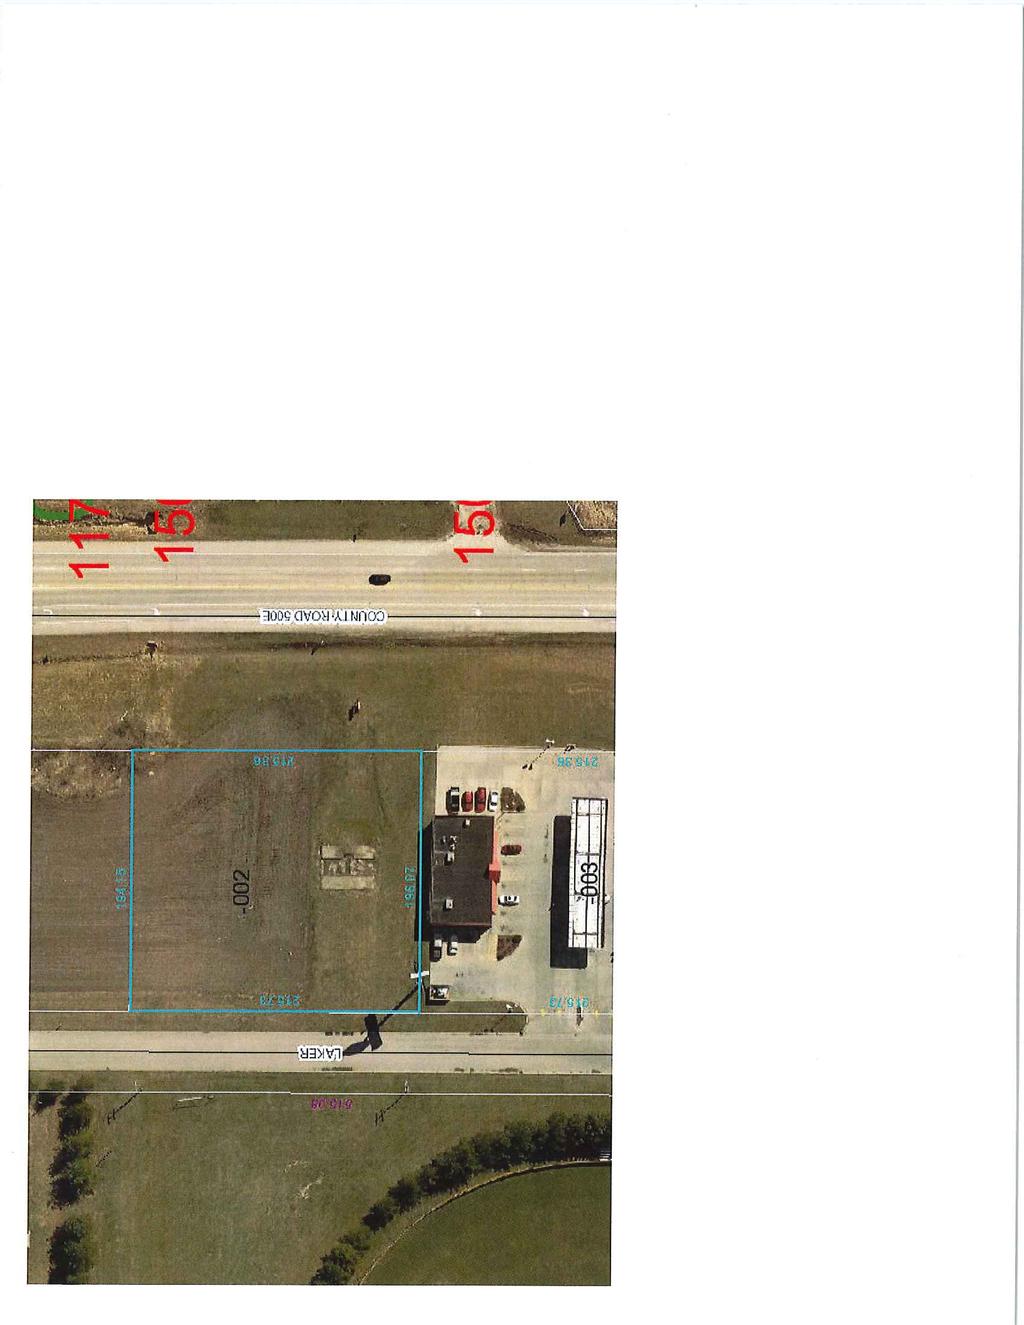 FOR SALE LAND IL #475080956 All SVN